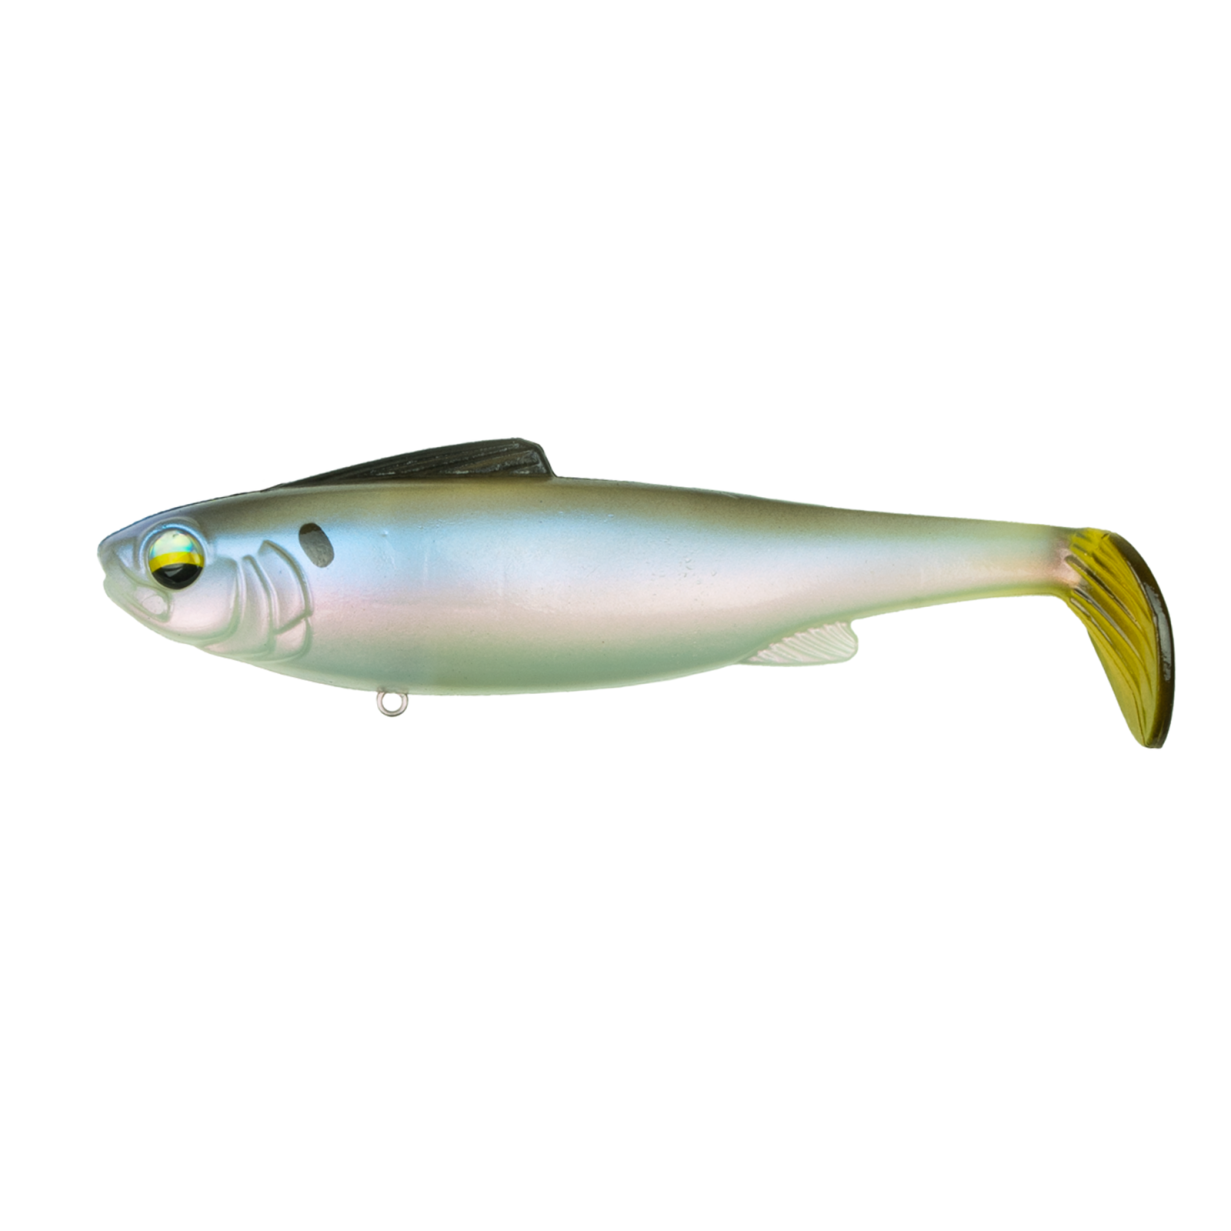 6th Sense Hangover Slow Sink / Clearwater Shad